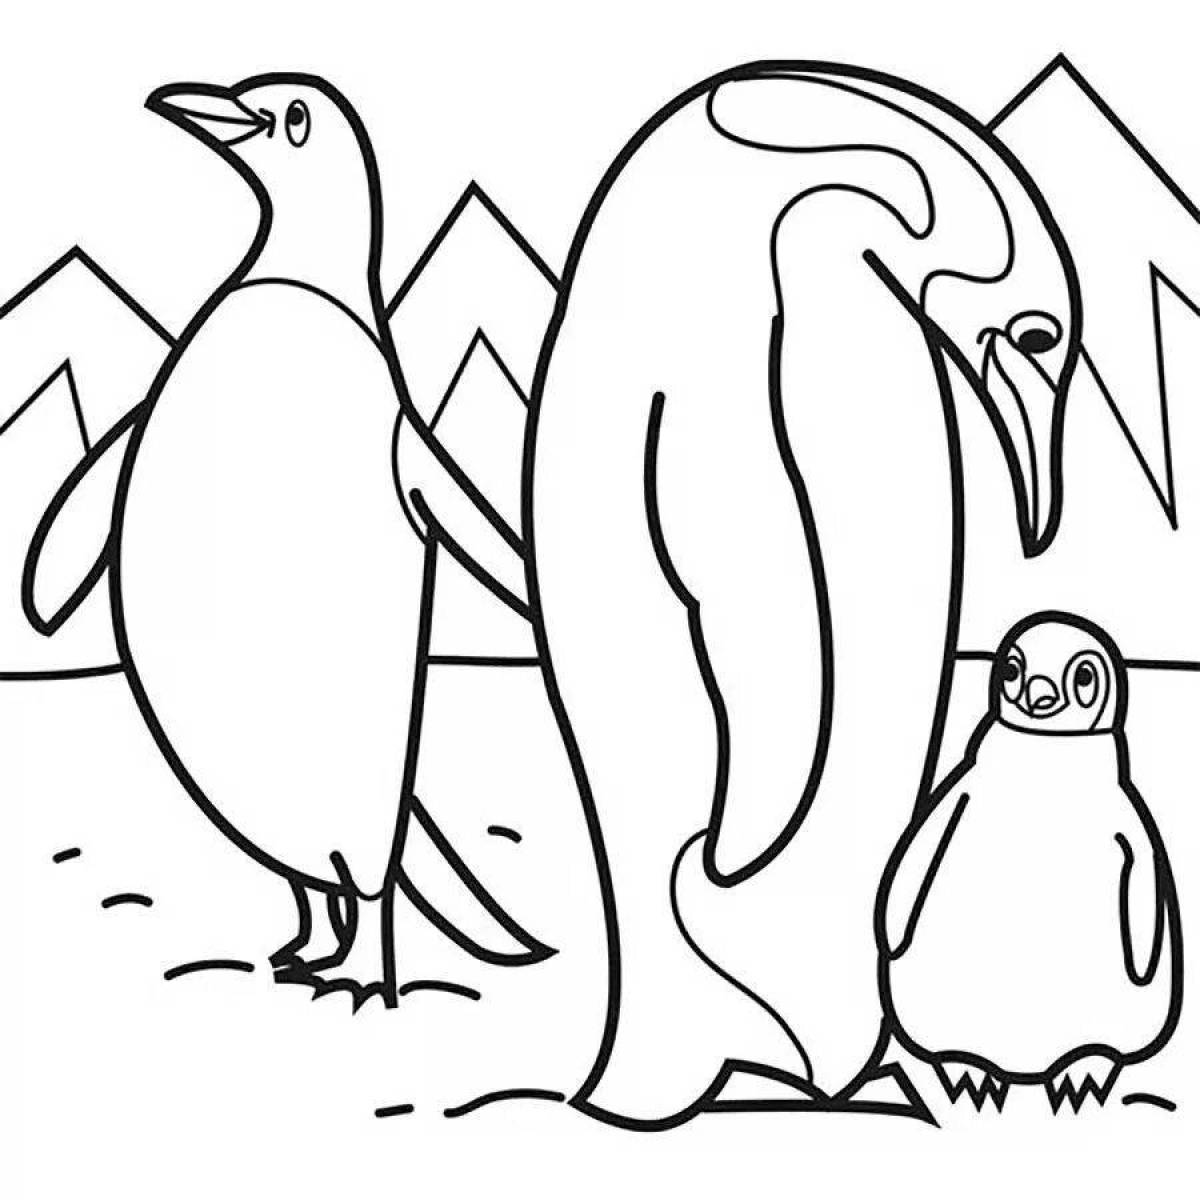 Wonderful penguin coloring pages